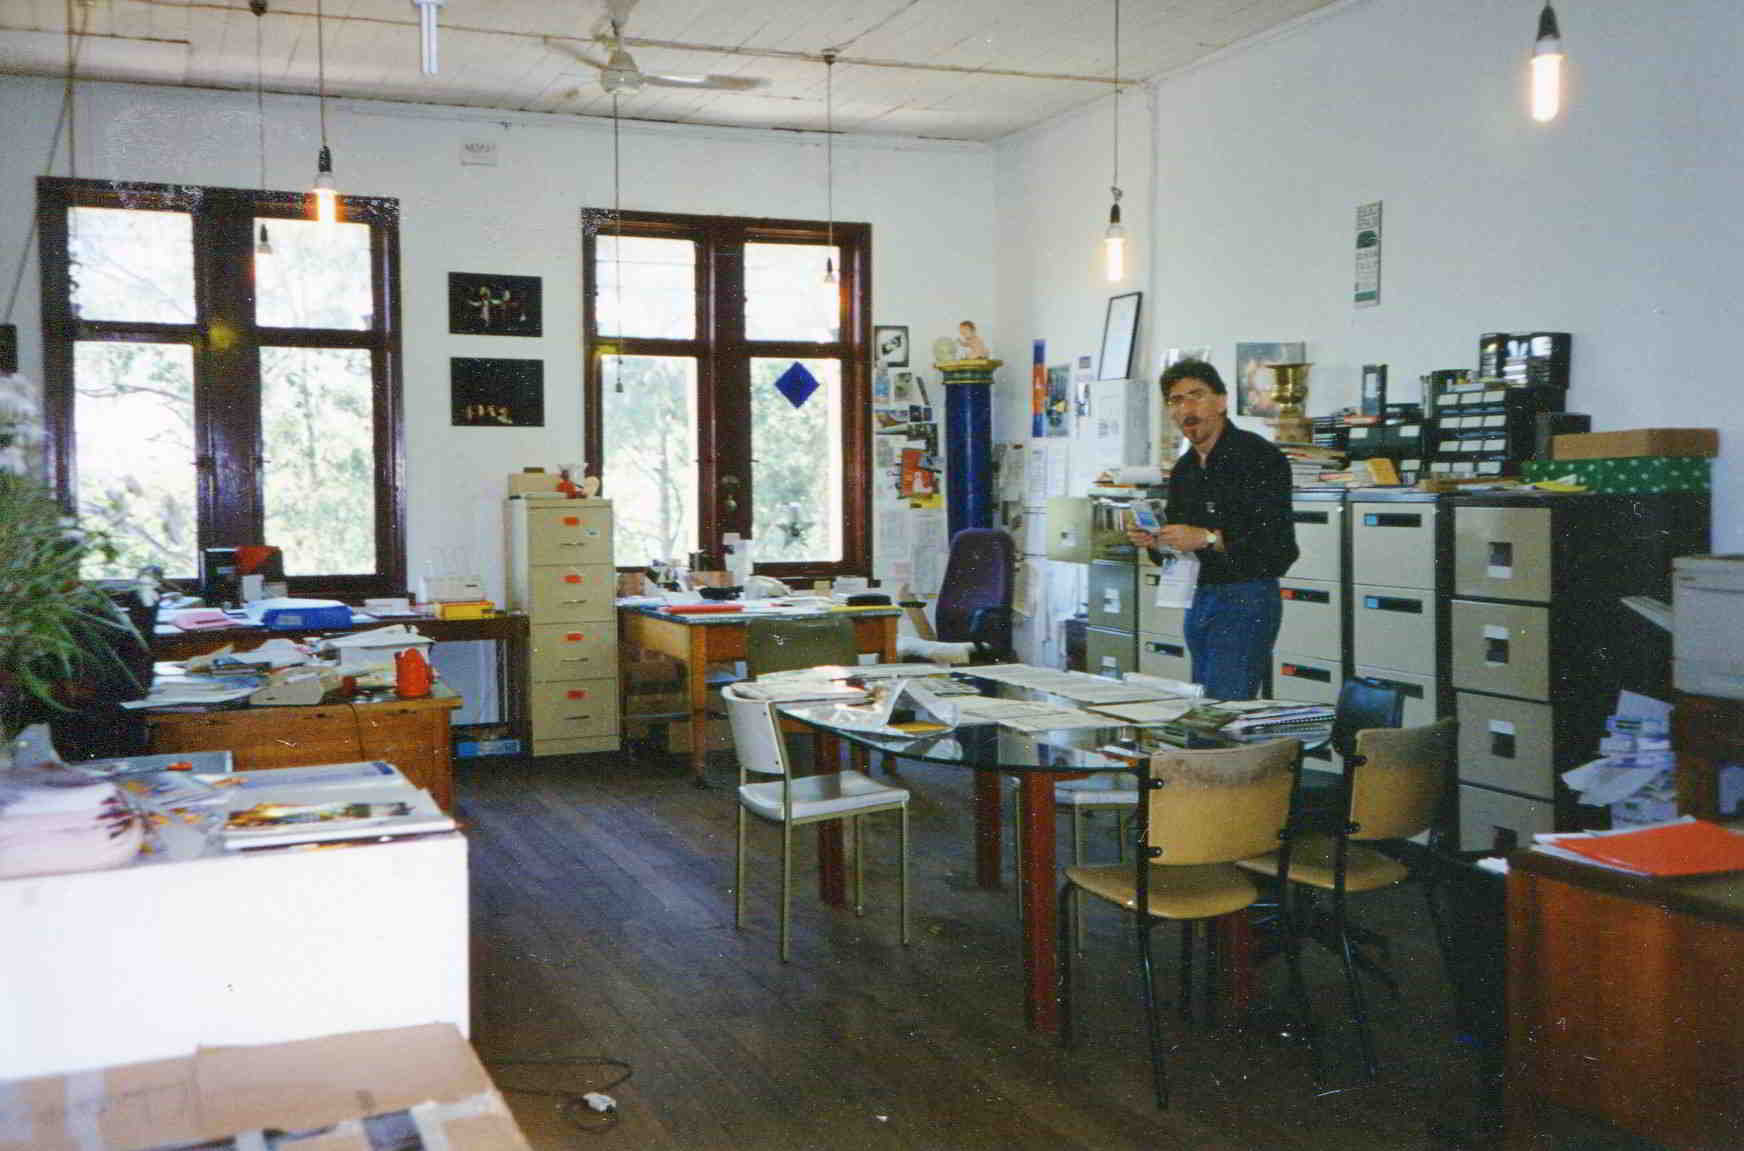 Handspan At Home cluttered office space with large windows, desk corner and central glass table where man is standing